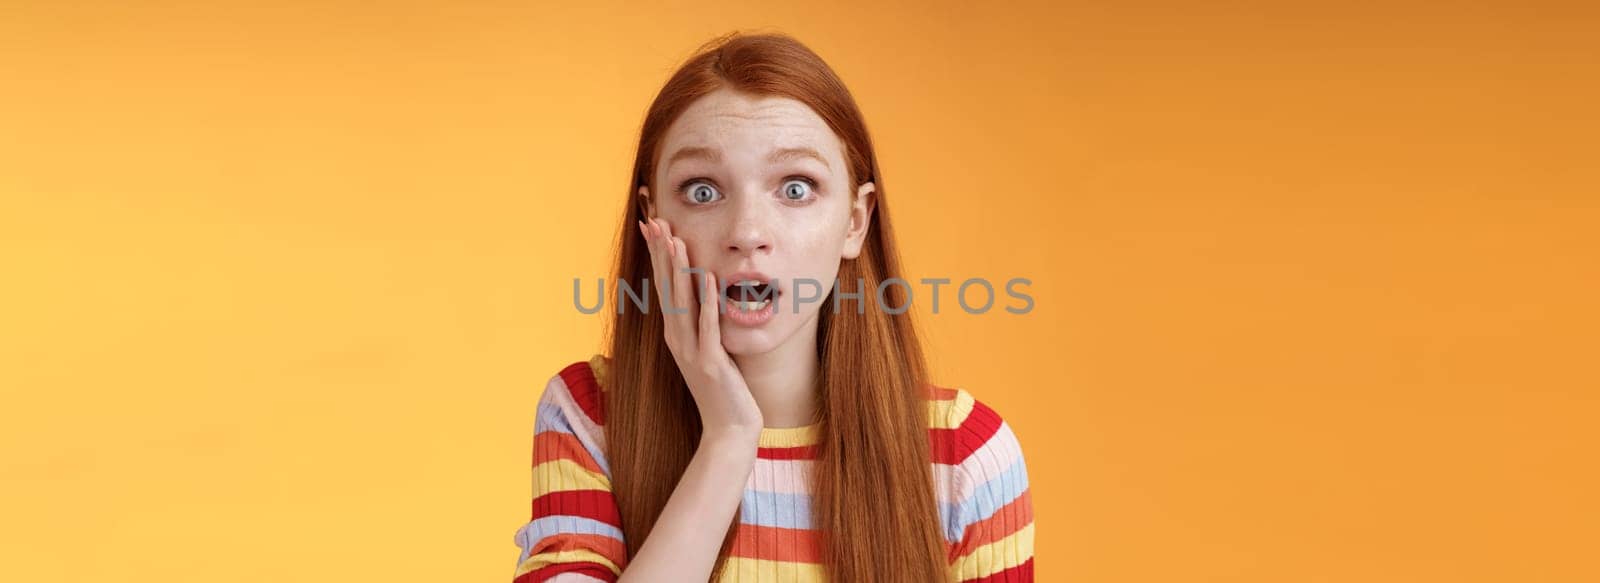 Concerned worried ginger girl blue eyes drop jaw gasping touch cheek confused looking nervously anxious, show empathy hearing terrible upsetting story standing orange background. Copy space